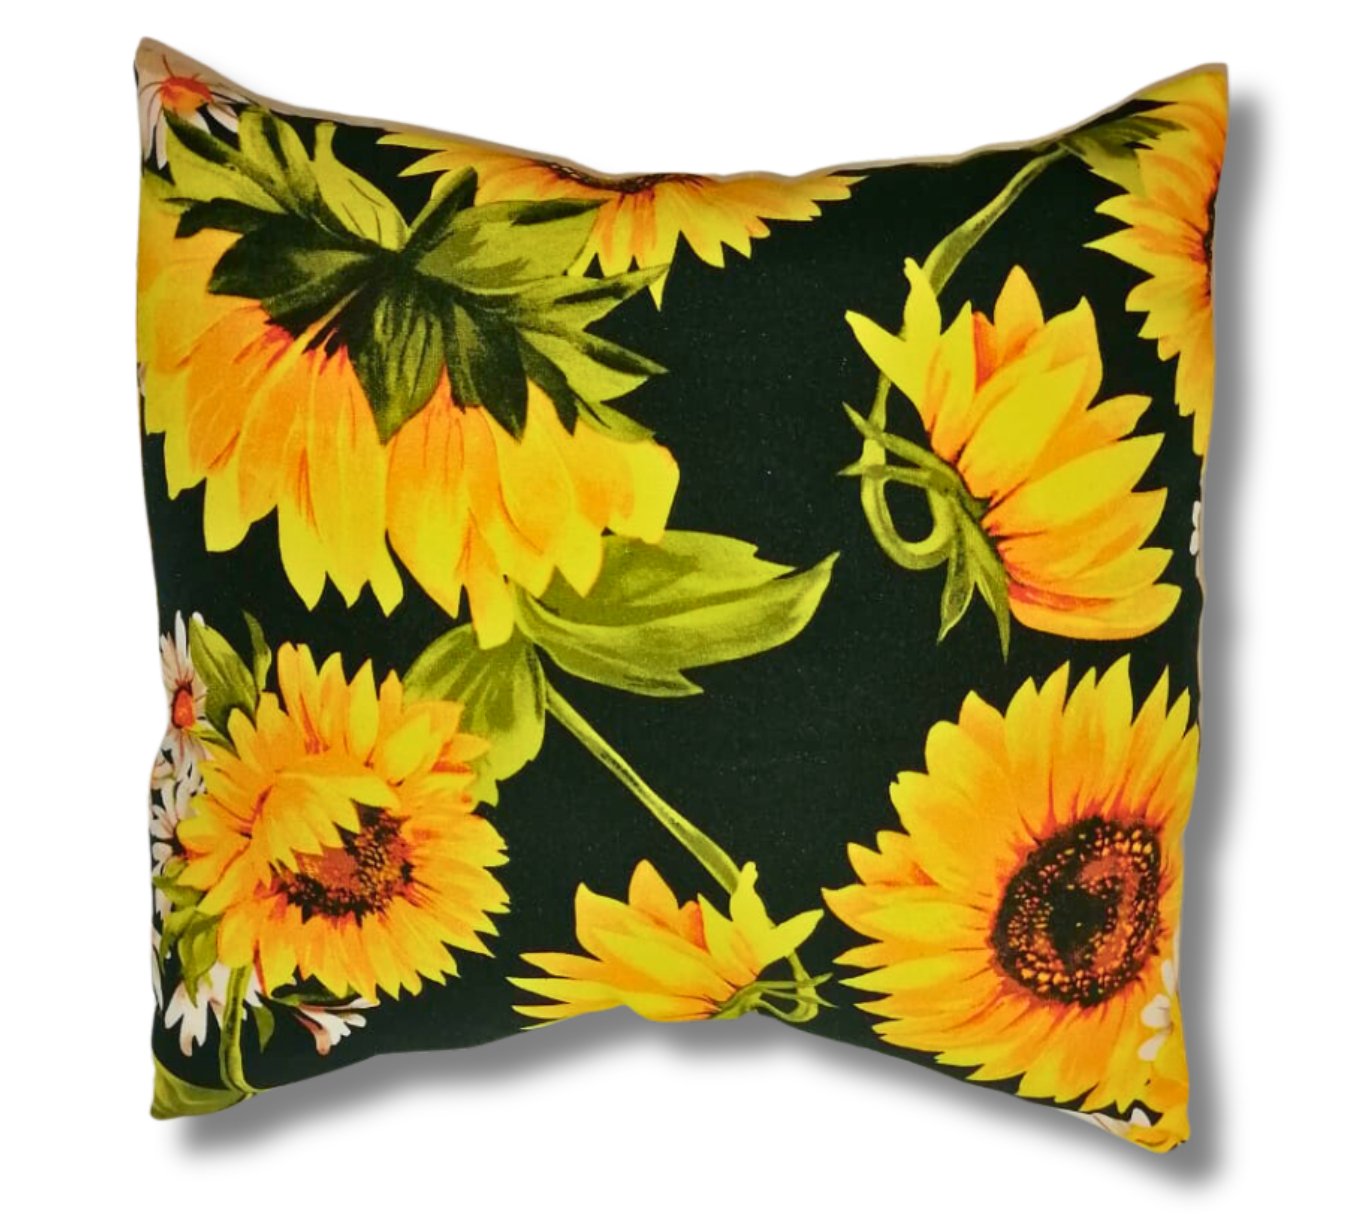 Decorative Cushions 40*40cm - That Couch Place